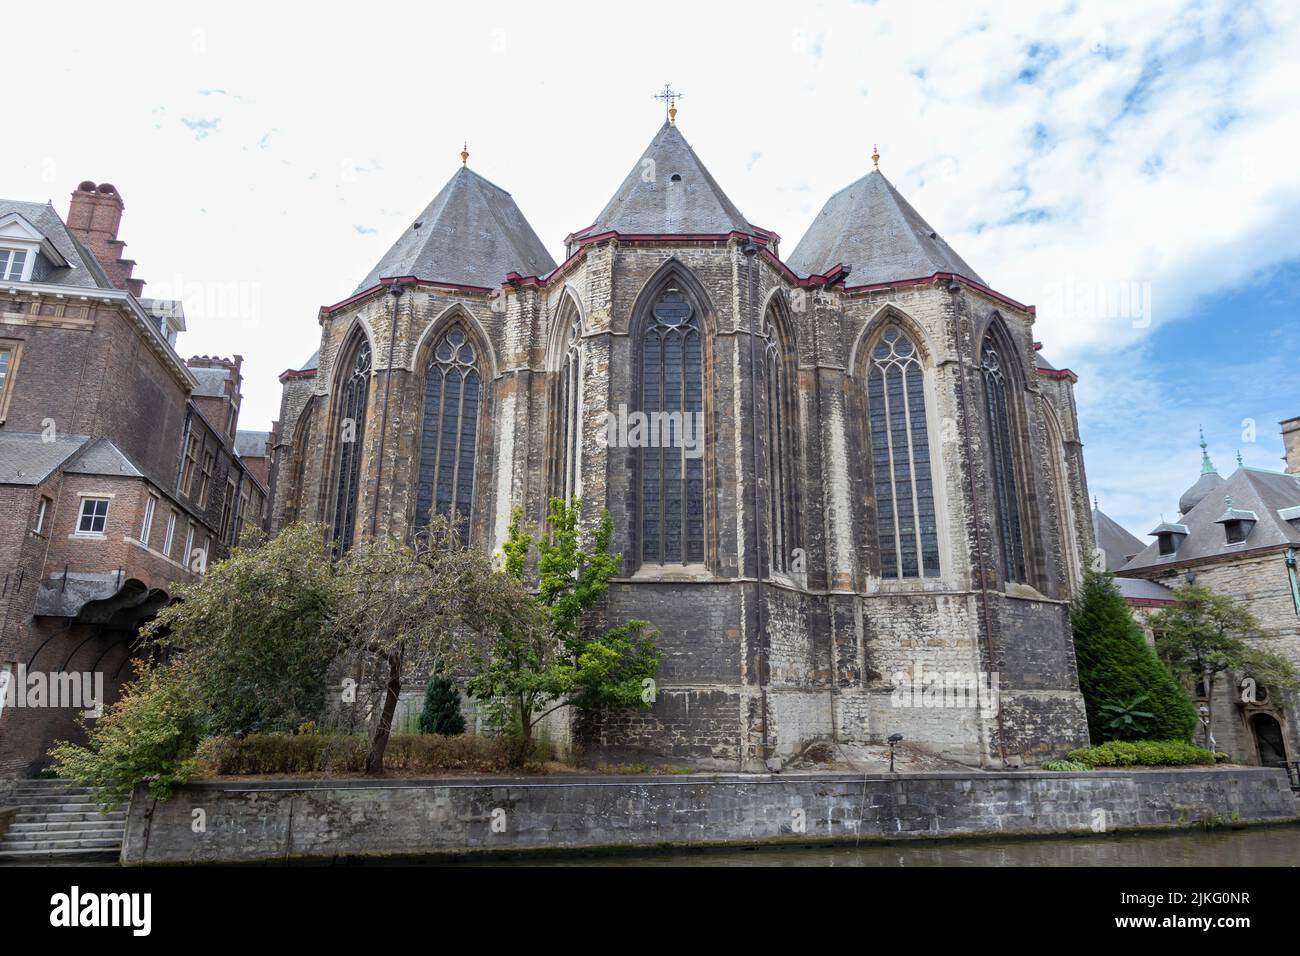 Saint Michael's Church, a view from the Leie River, Ghent, Belgium Stock Photo